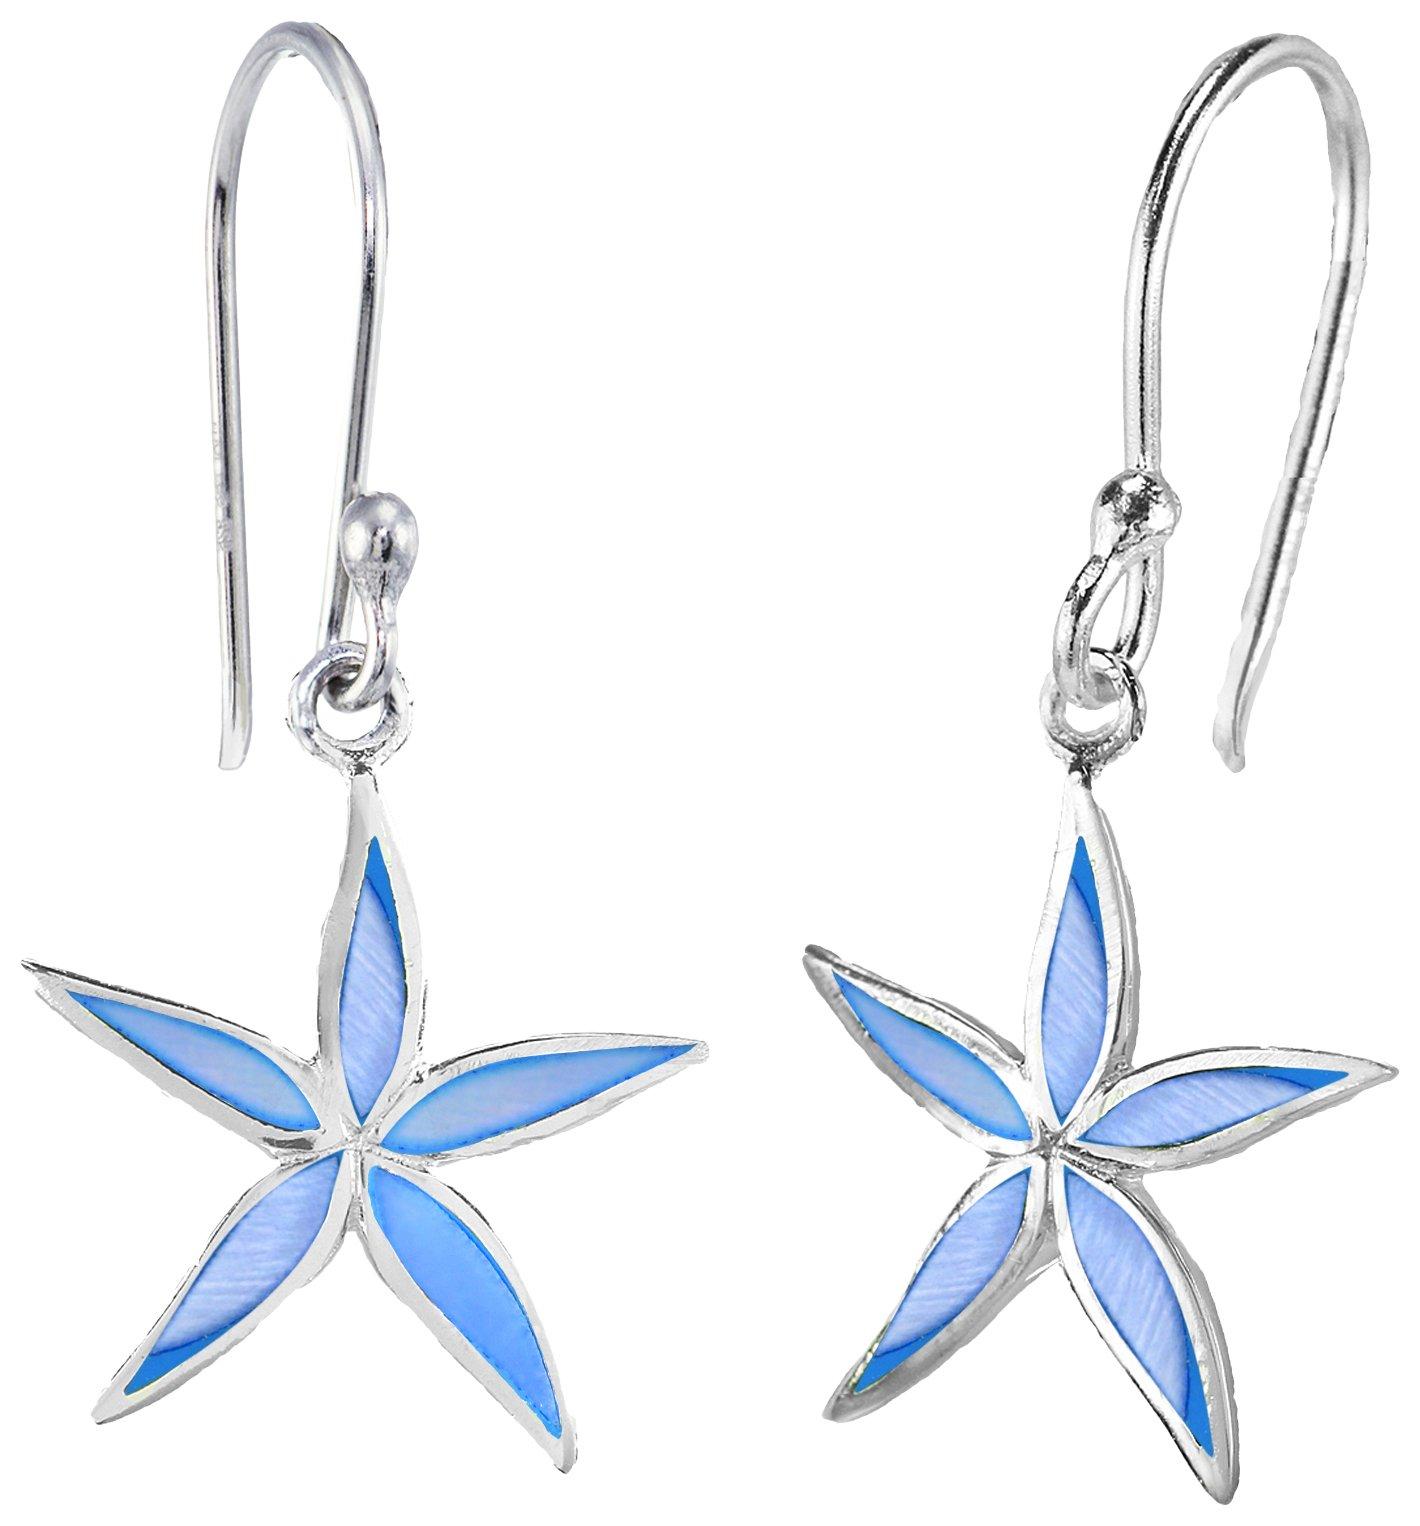 Silver Plated Starfish Earrings